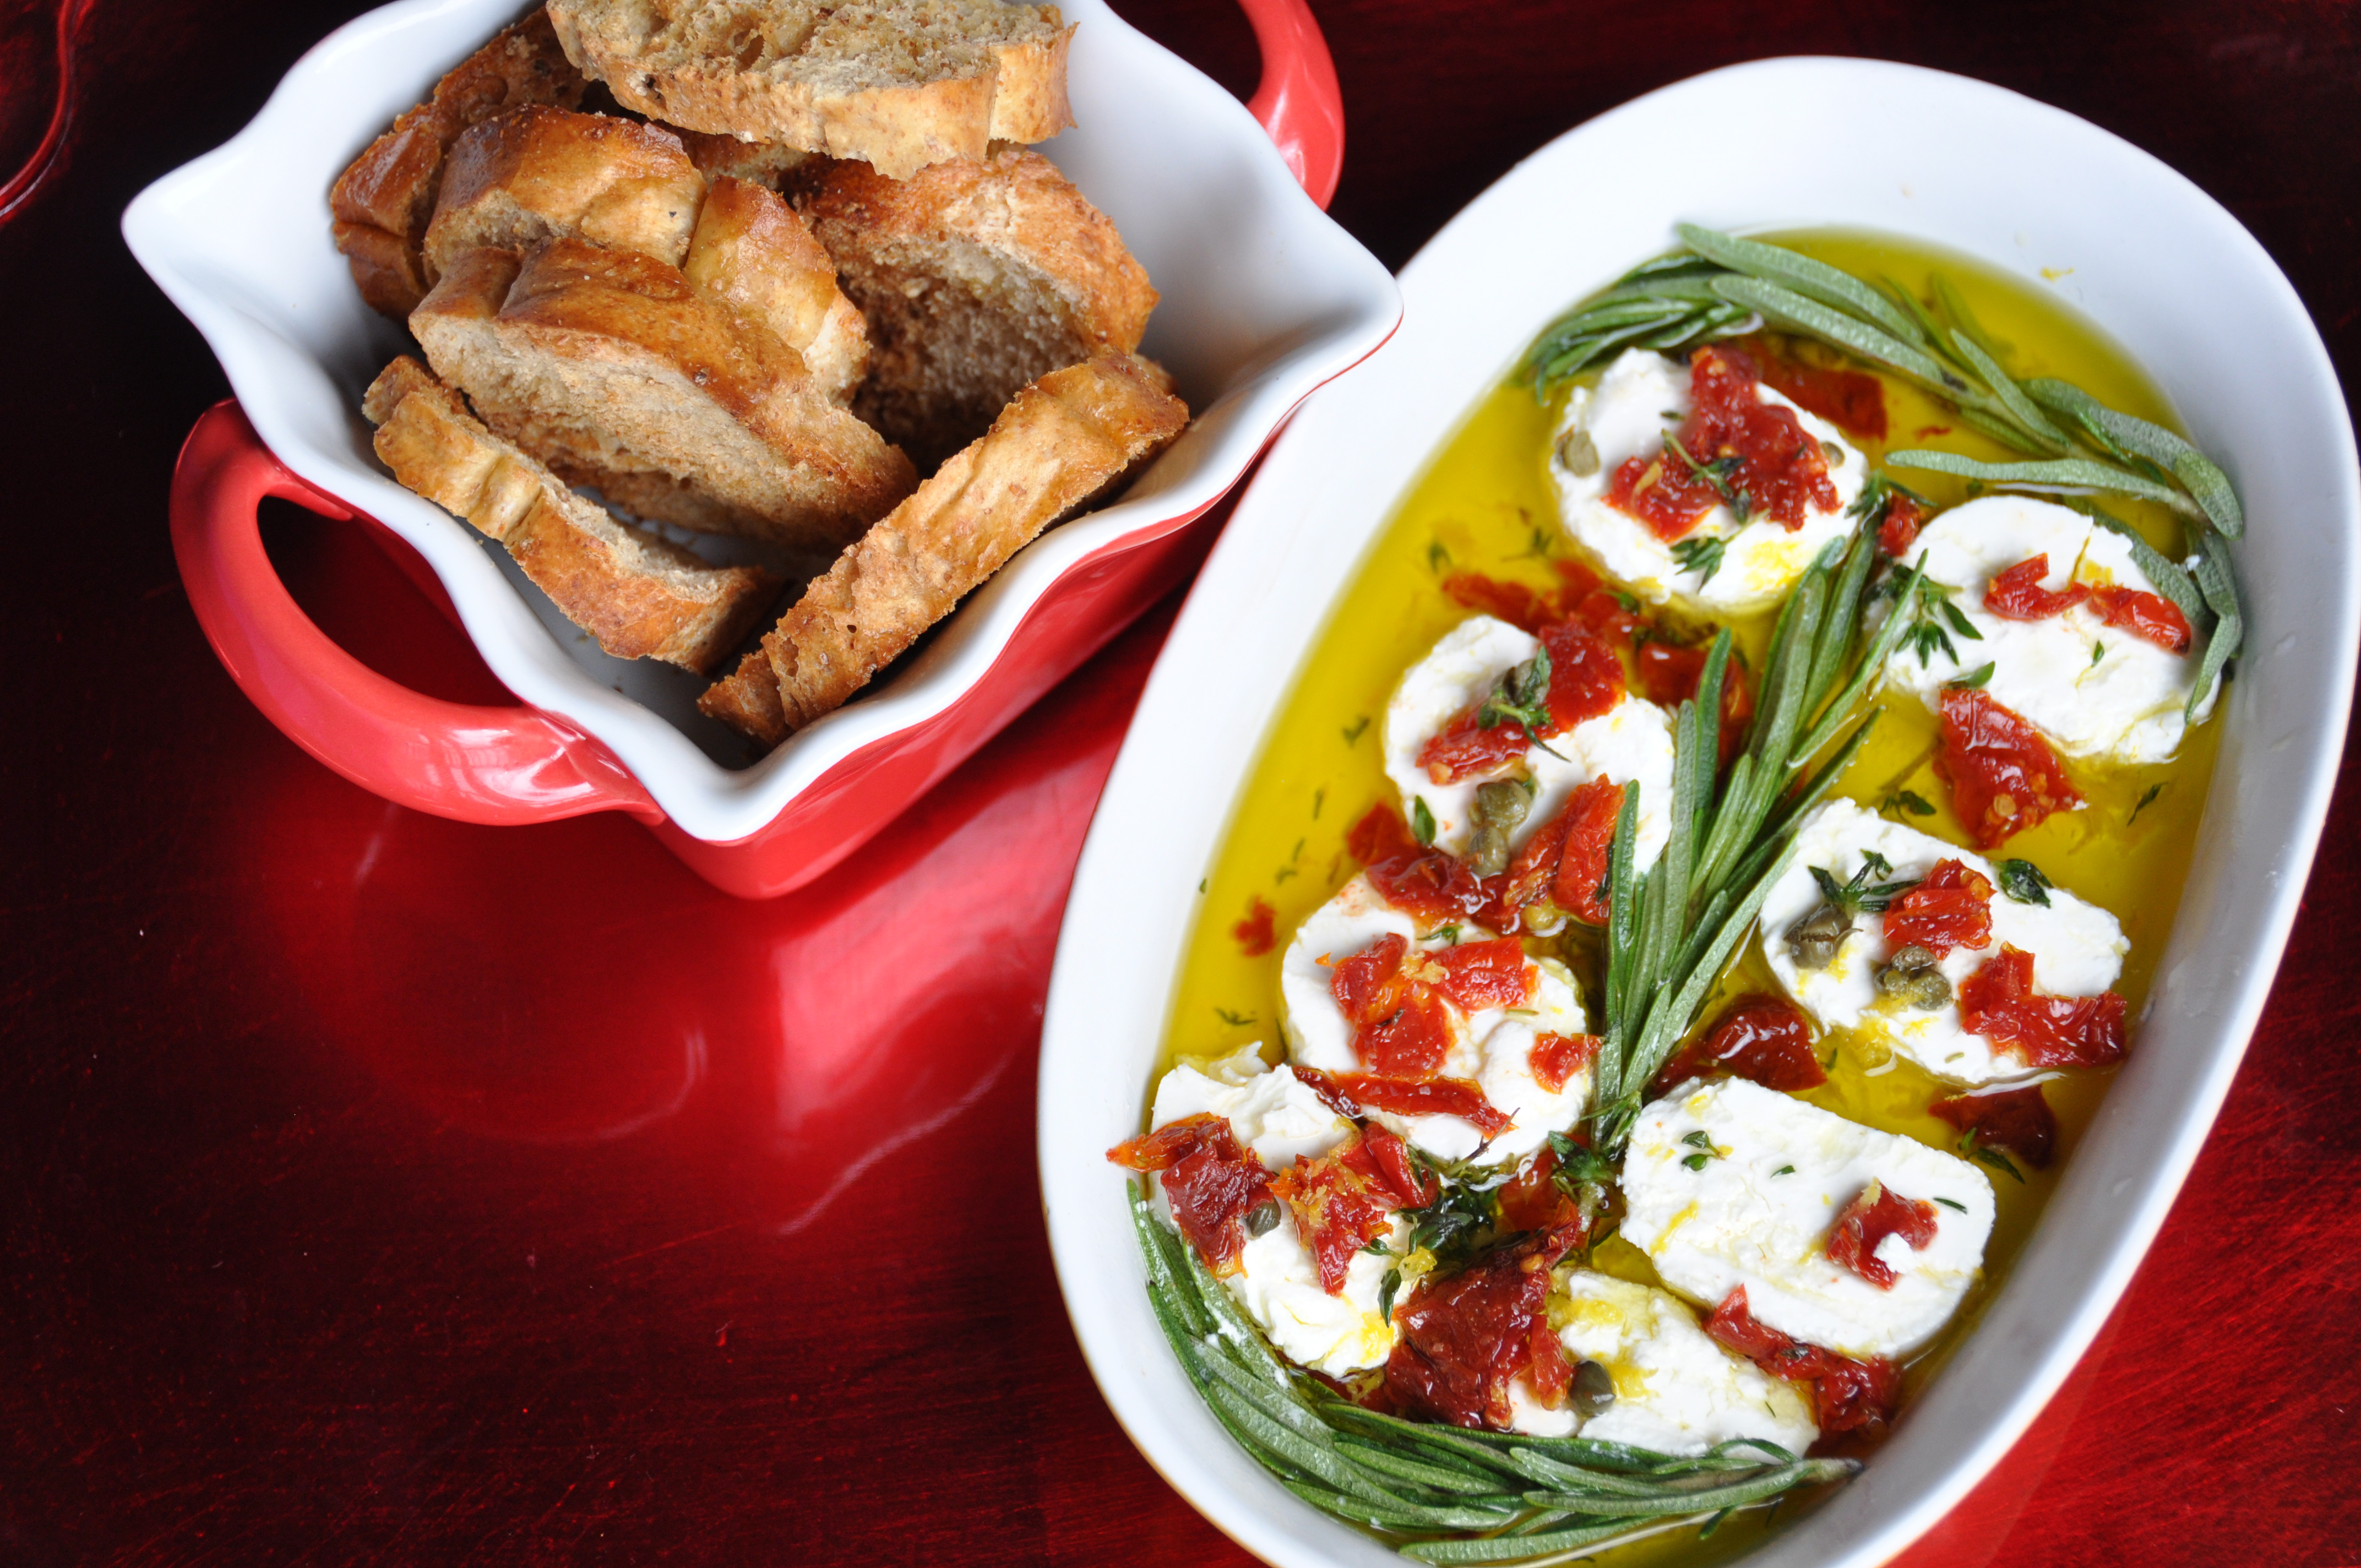 Marinated Goat Cheese With Herbs and Lemon | Nutritious Eats